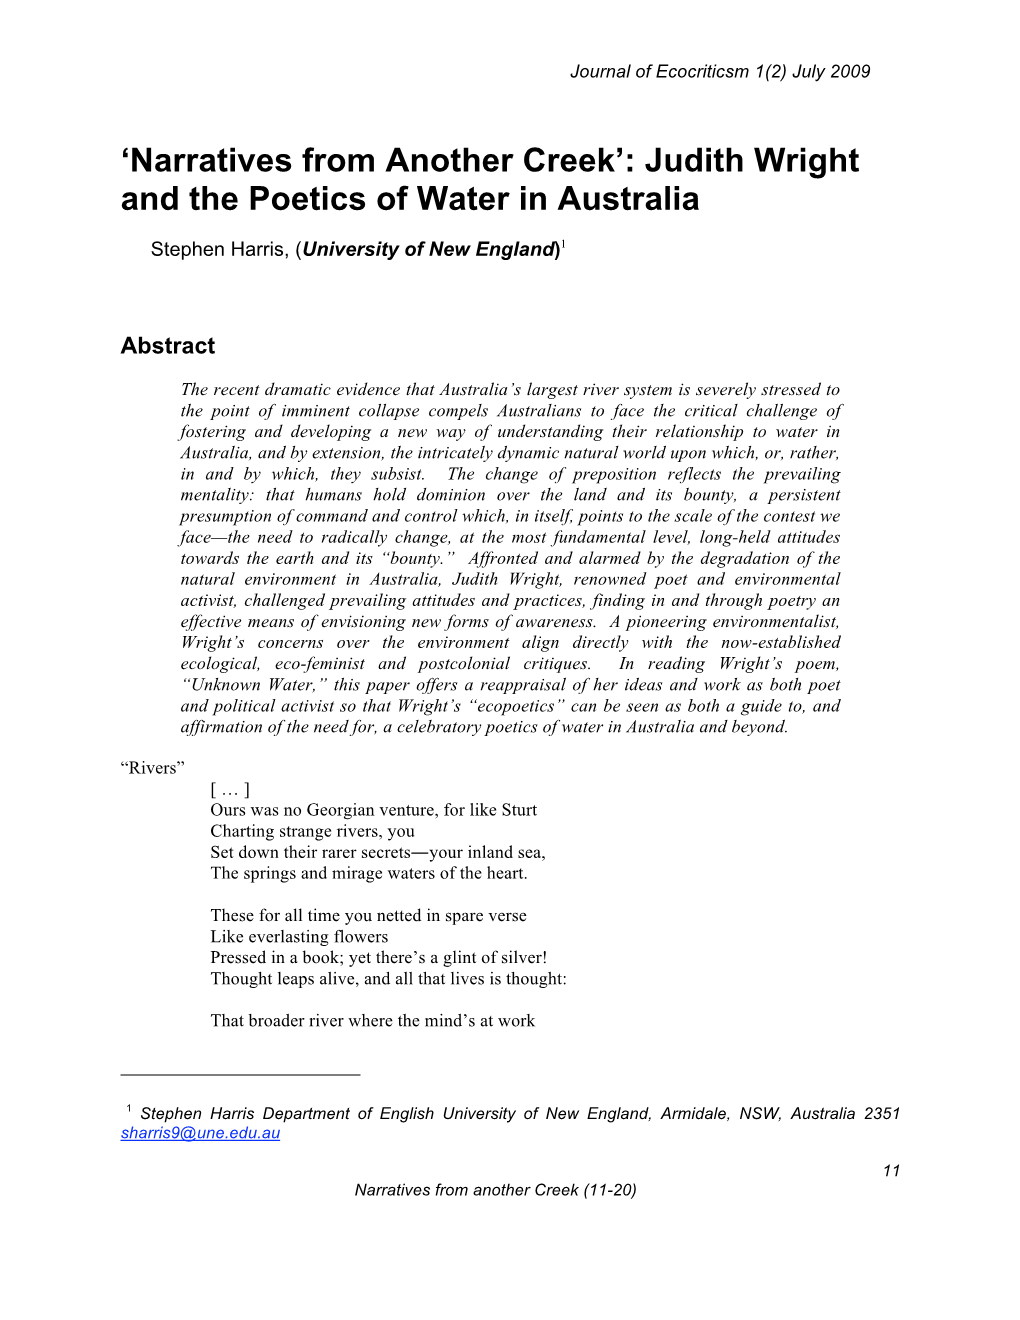 'Narratives from Another Creek': Judith Wright and the Poetics of Water In